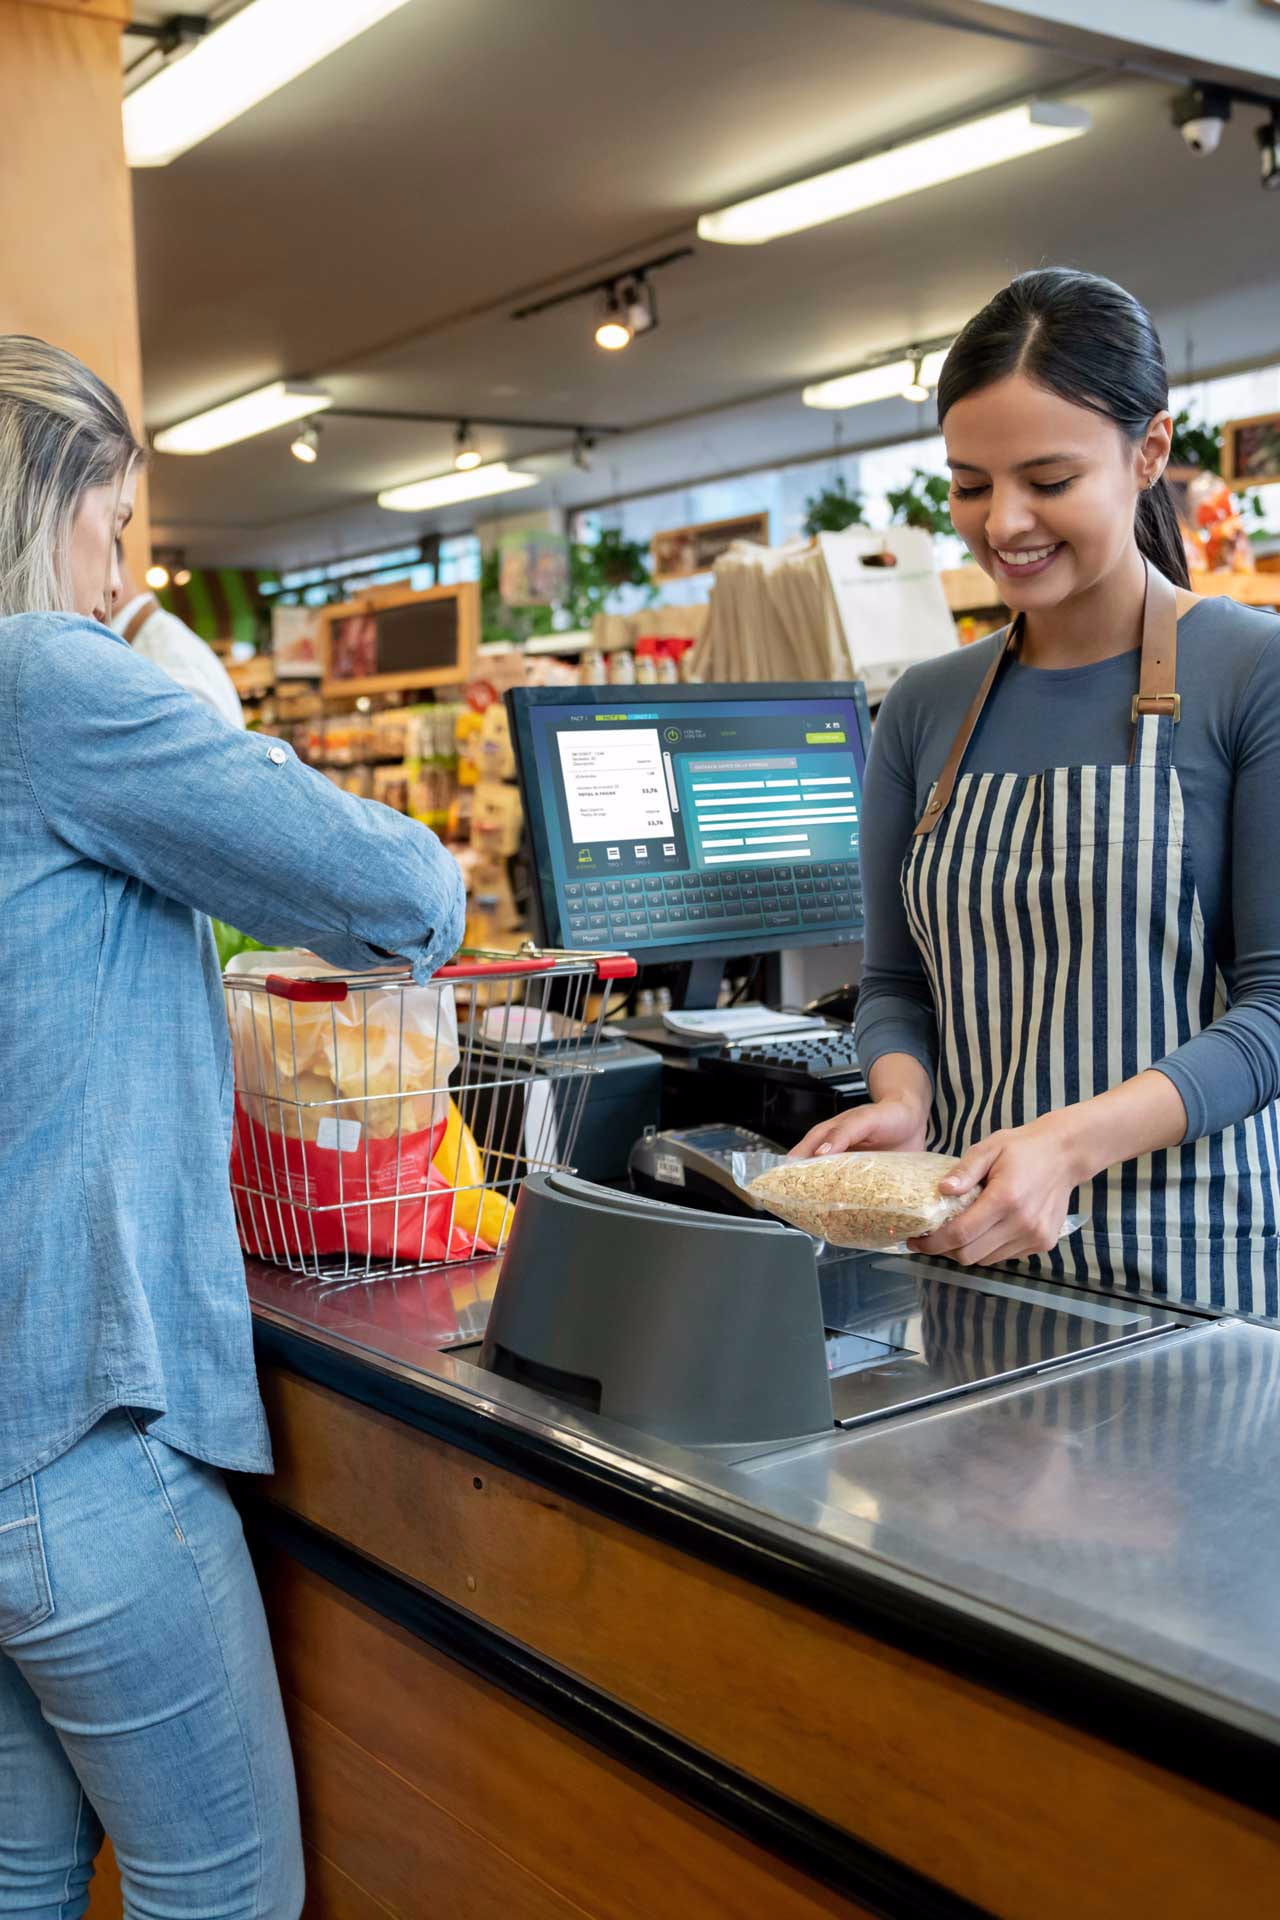 Cheerful employees at supermarket doing checkout for customers